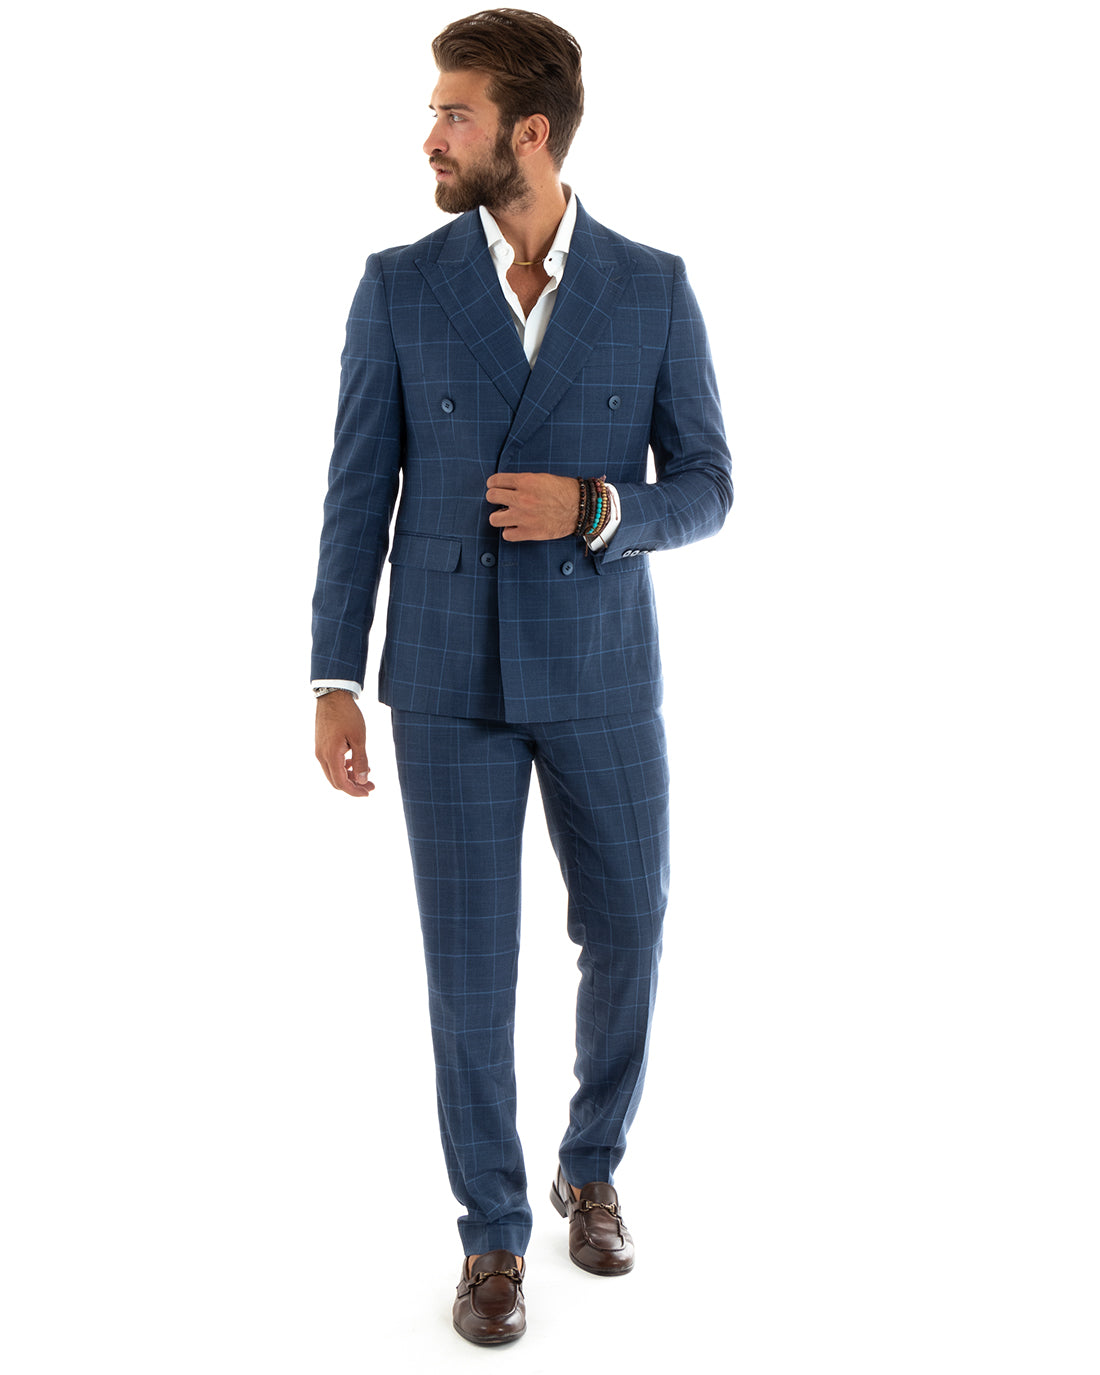 Double-Breasted Men's Suit Suit Jacket Trousers Blue Checked Elegant Casual GIOSAL-OU2402A